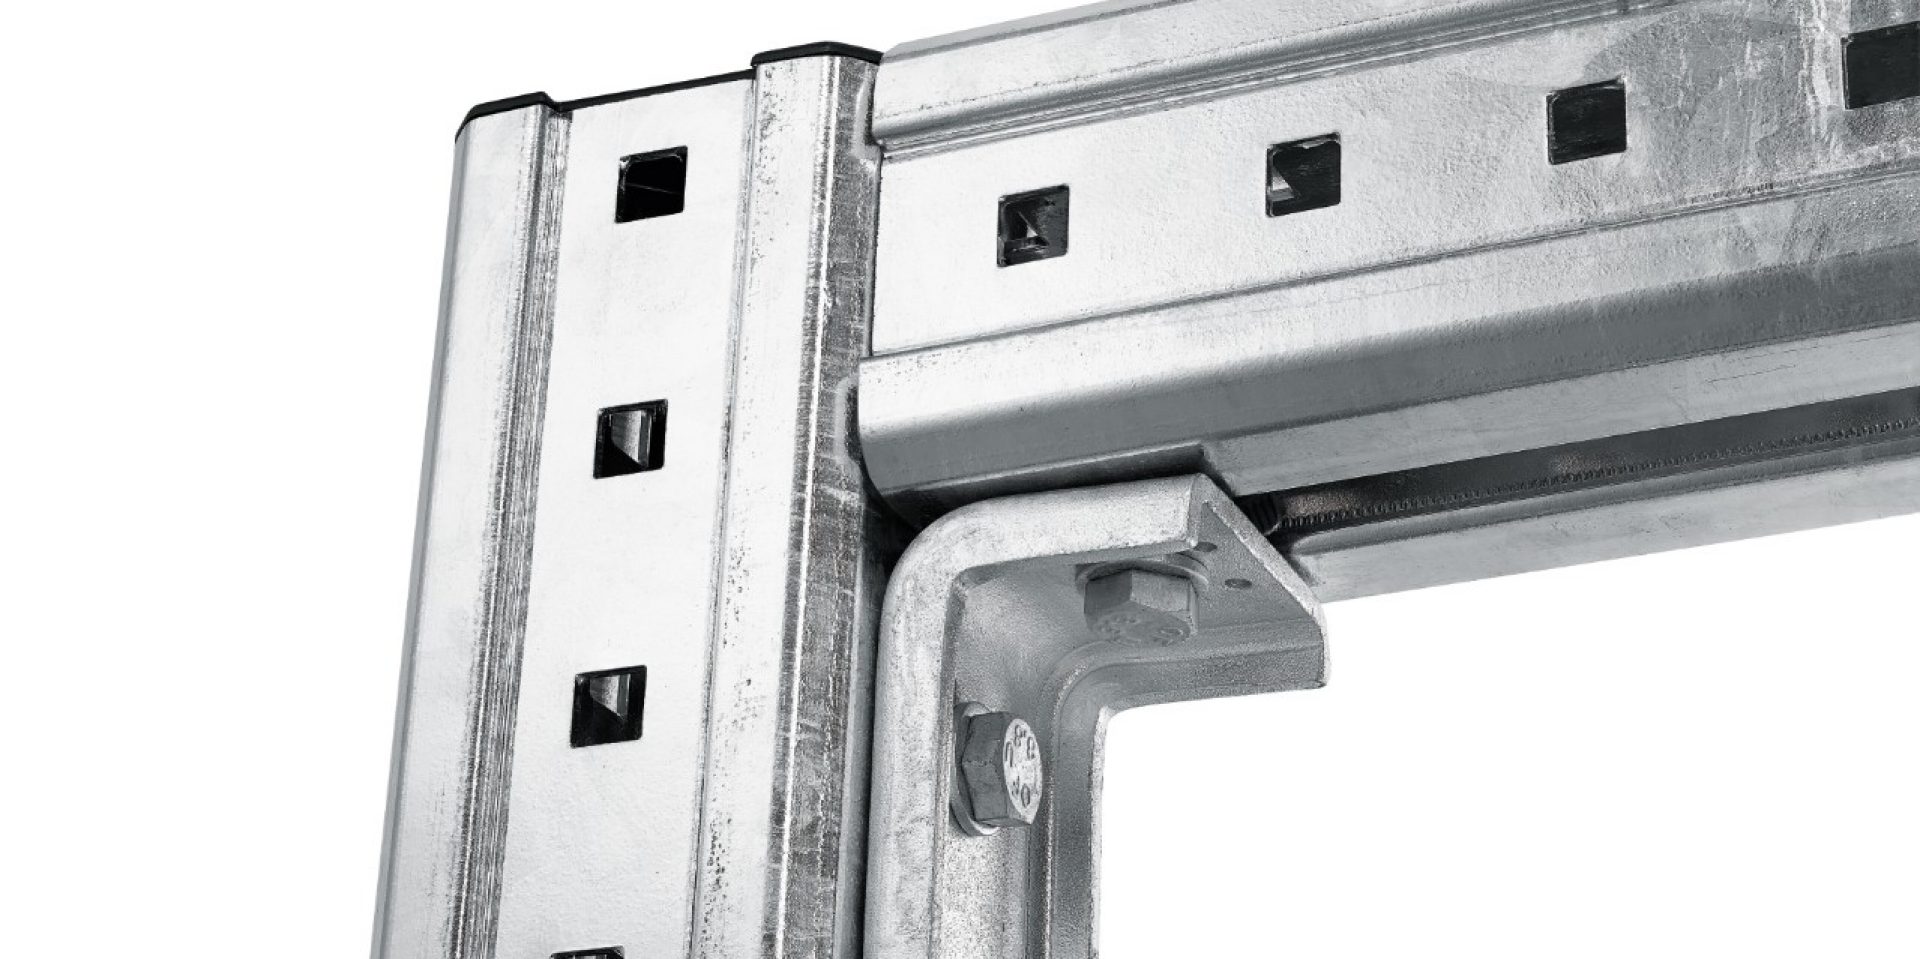 Hilti MIQ modular support system for heavy duty applications